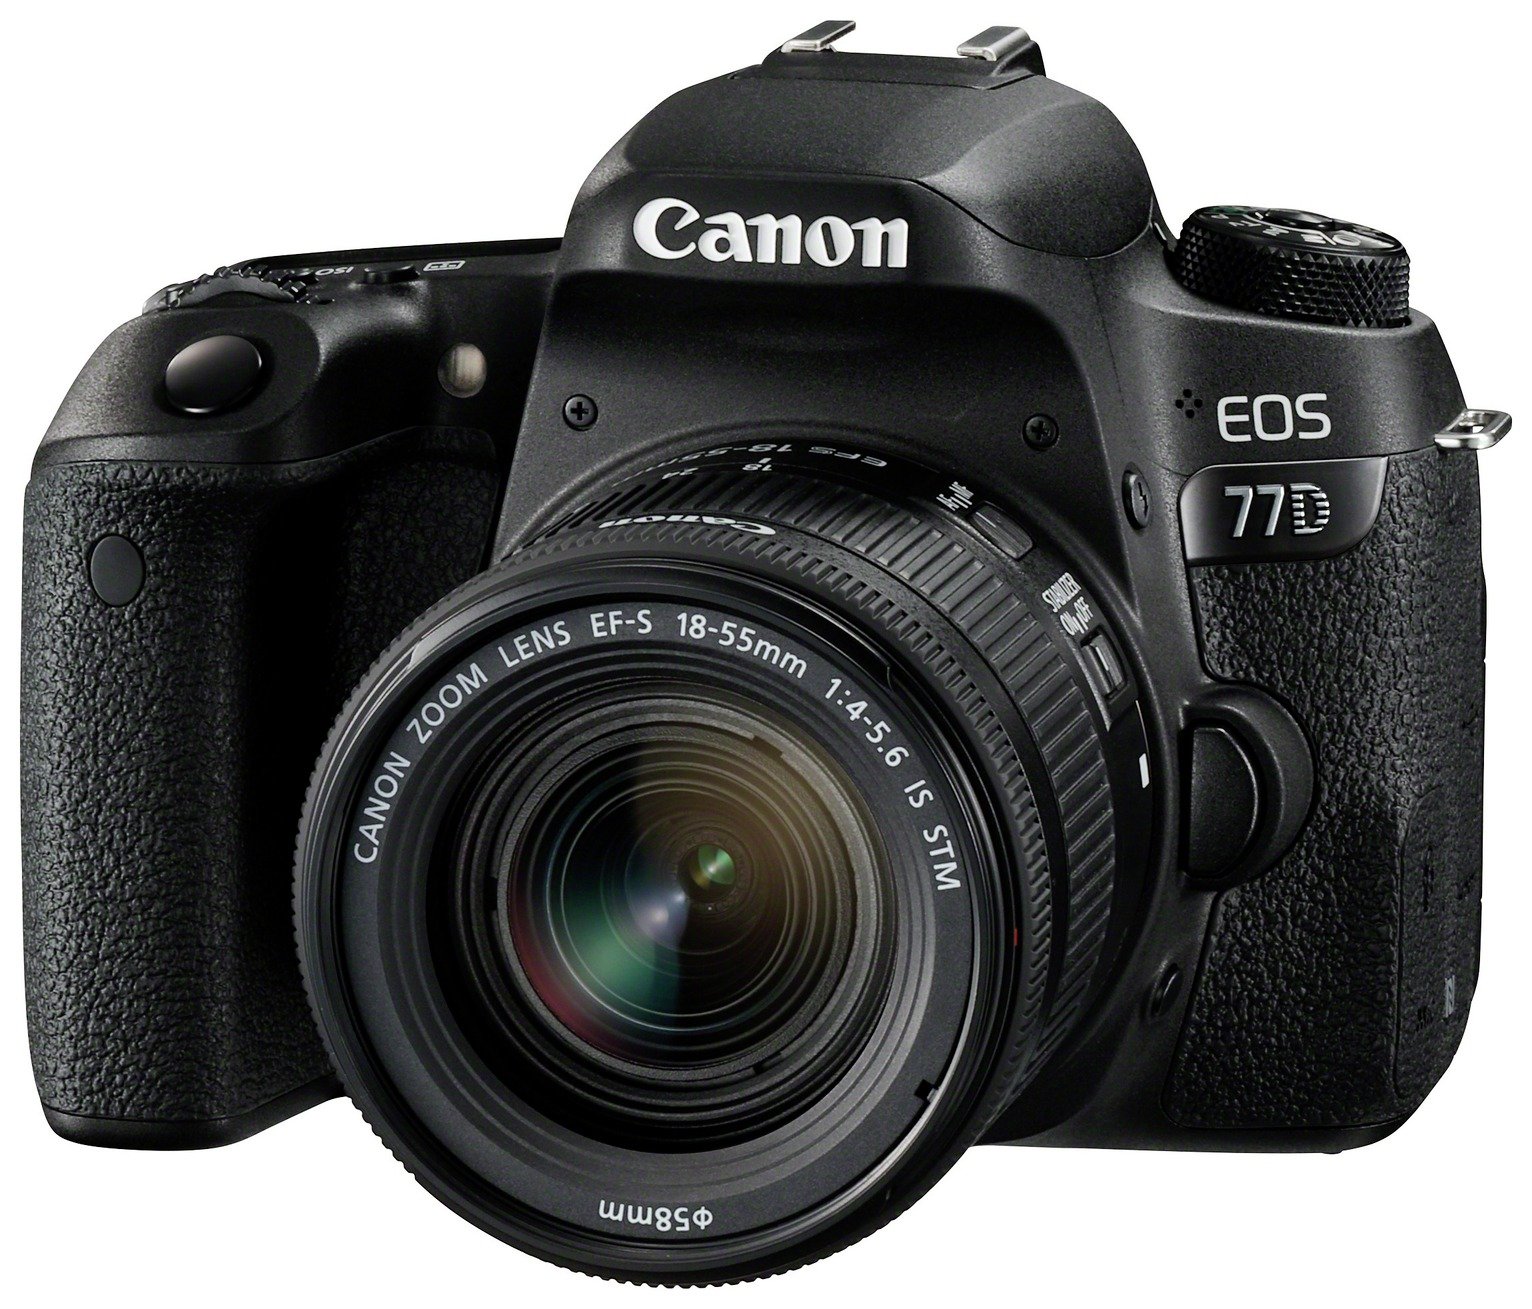 Canon EOS 77D DSLR Camera with 18-55mm Lens Review